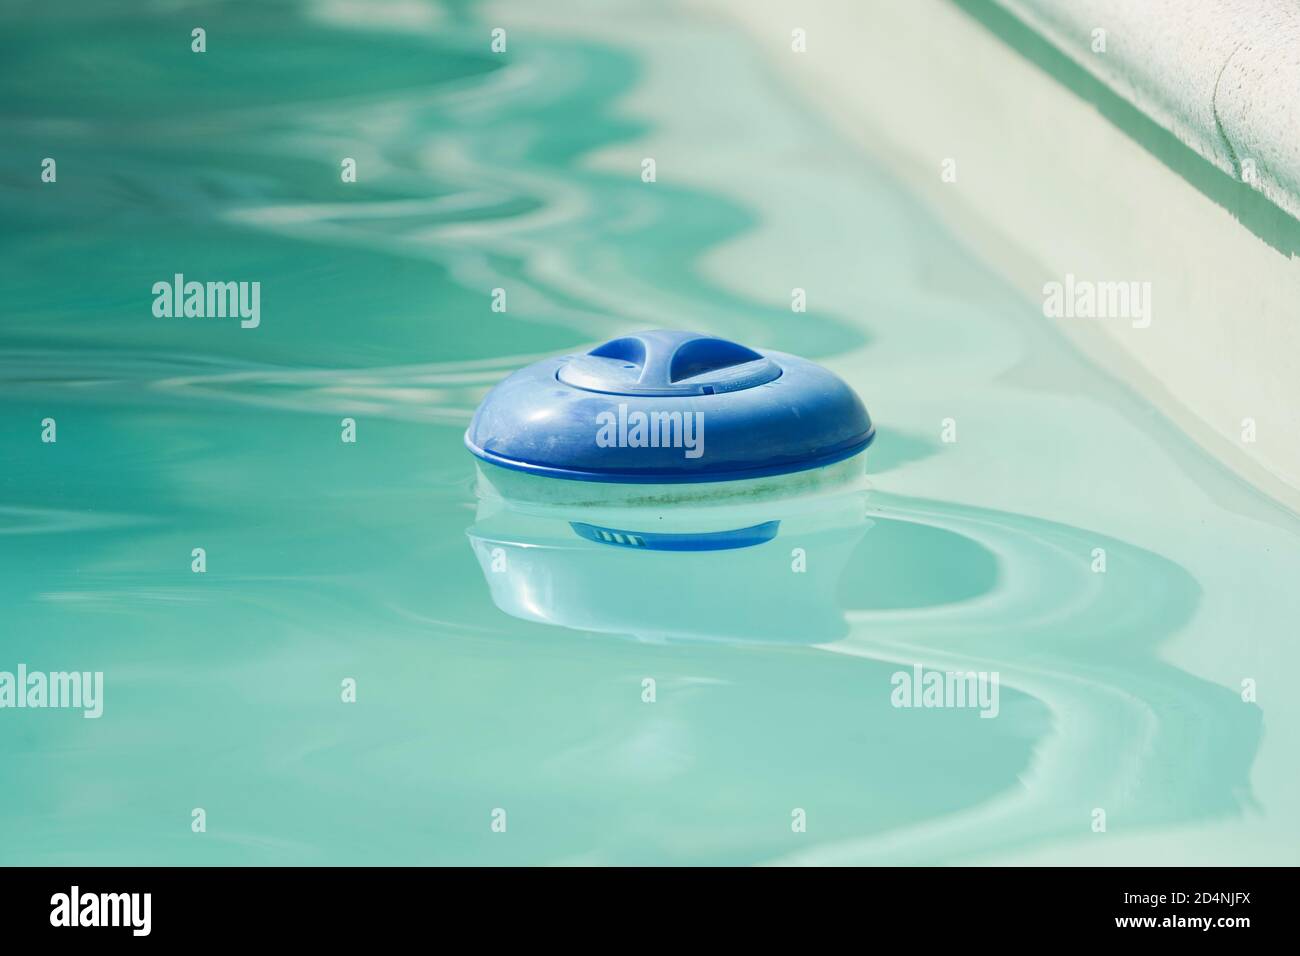 Chlorine container floating in a swimming pool. Spain. Stock Photo